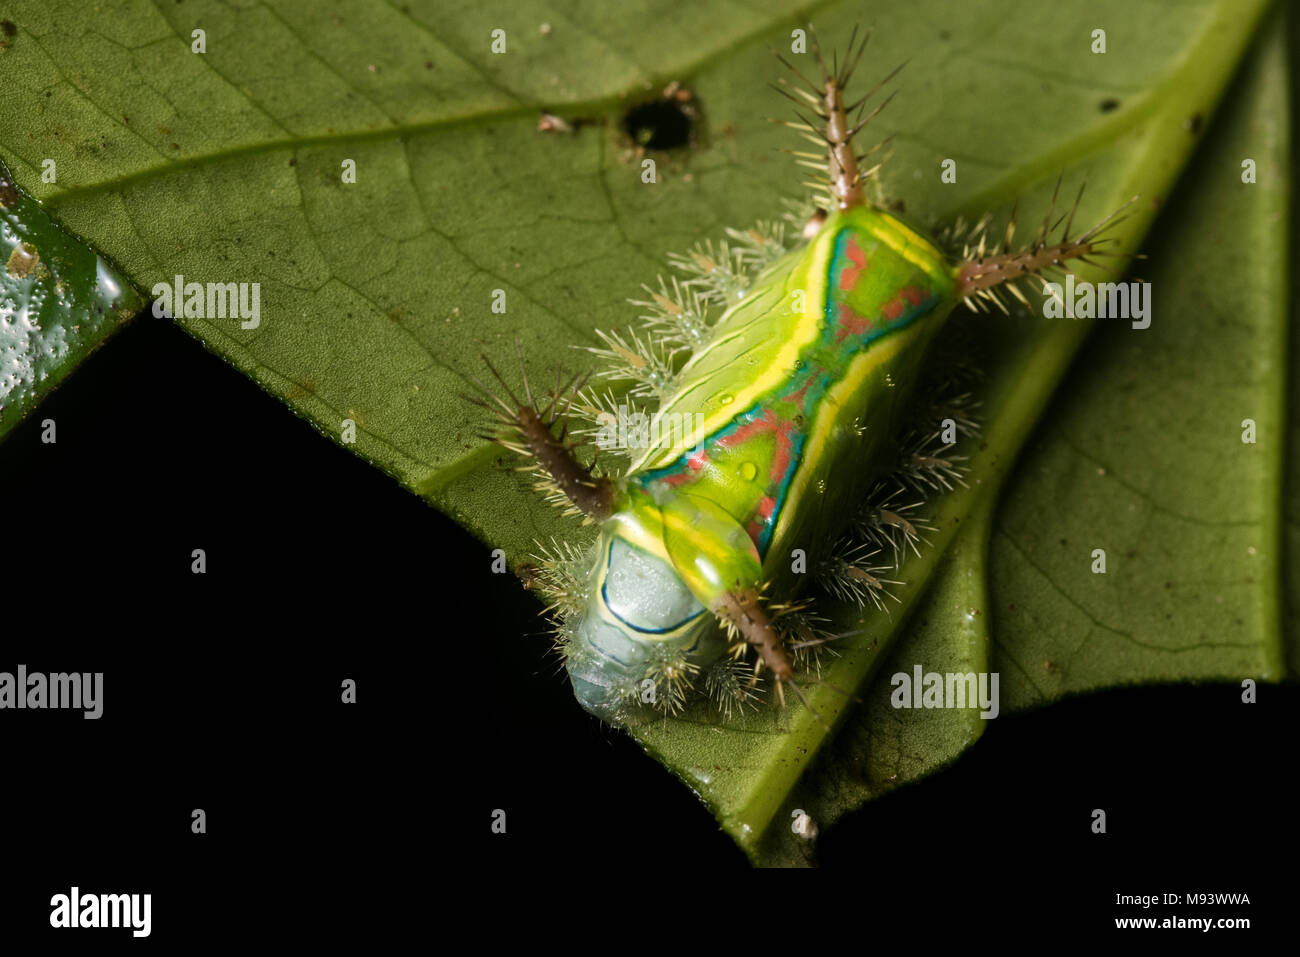 A stinging caterpillar from the Limacodidae family of moths. Stock Photo